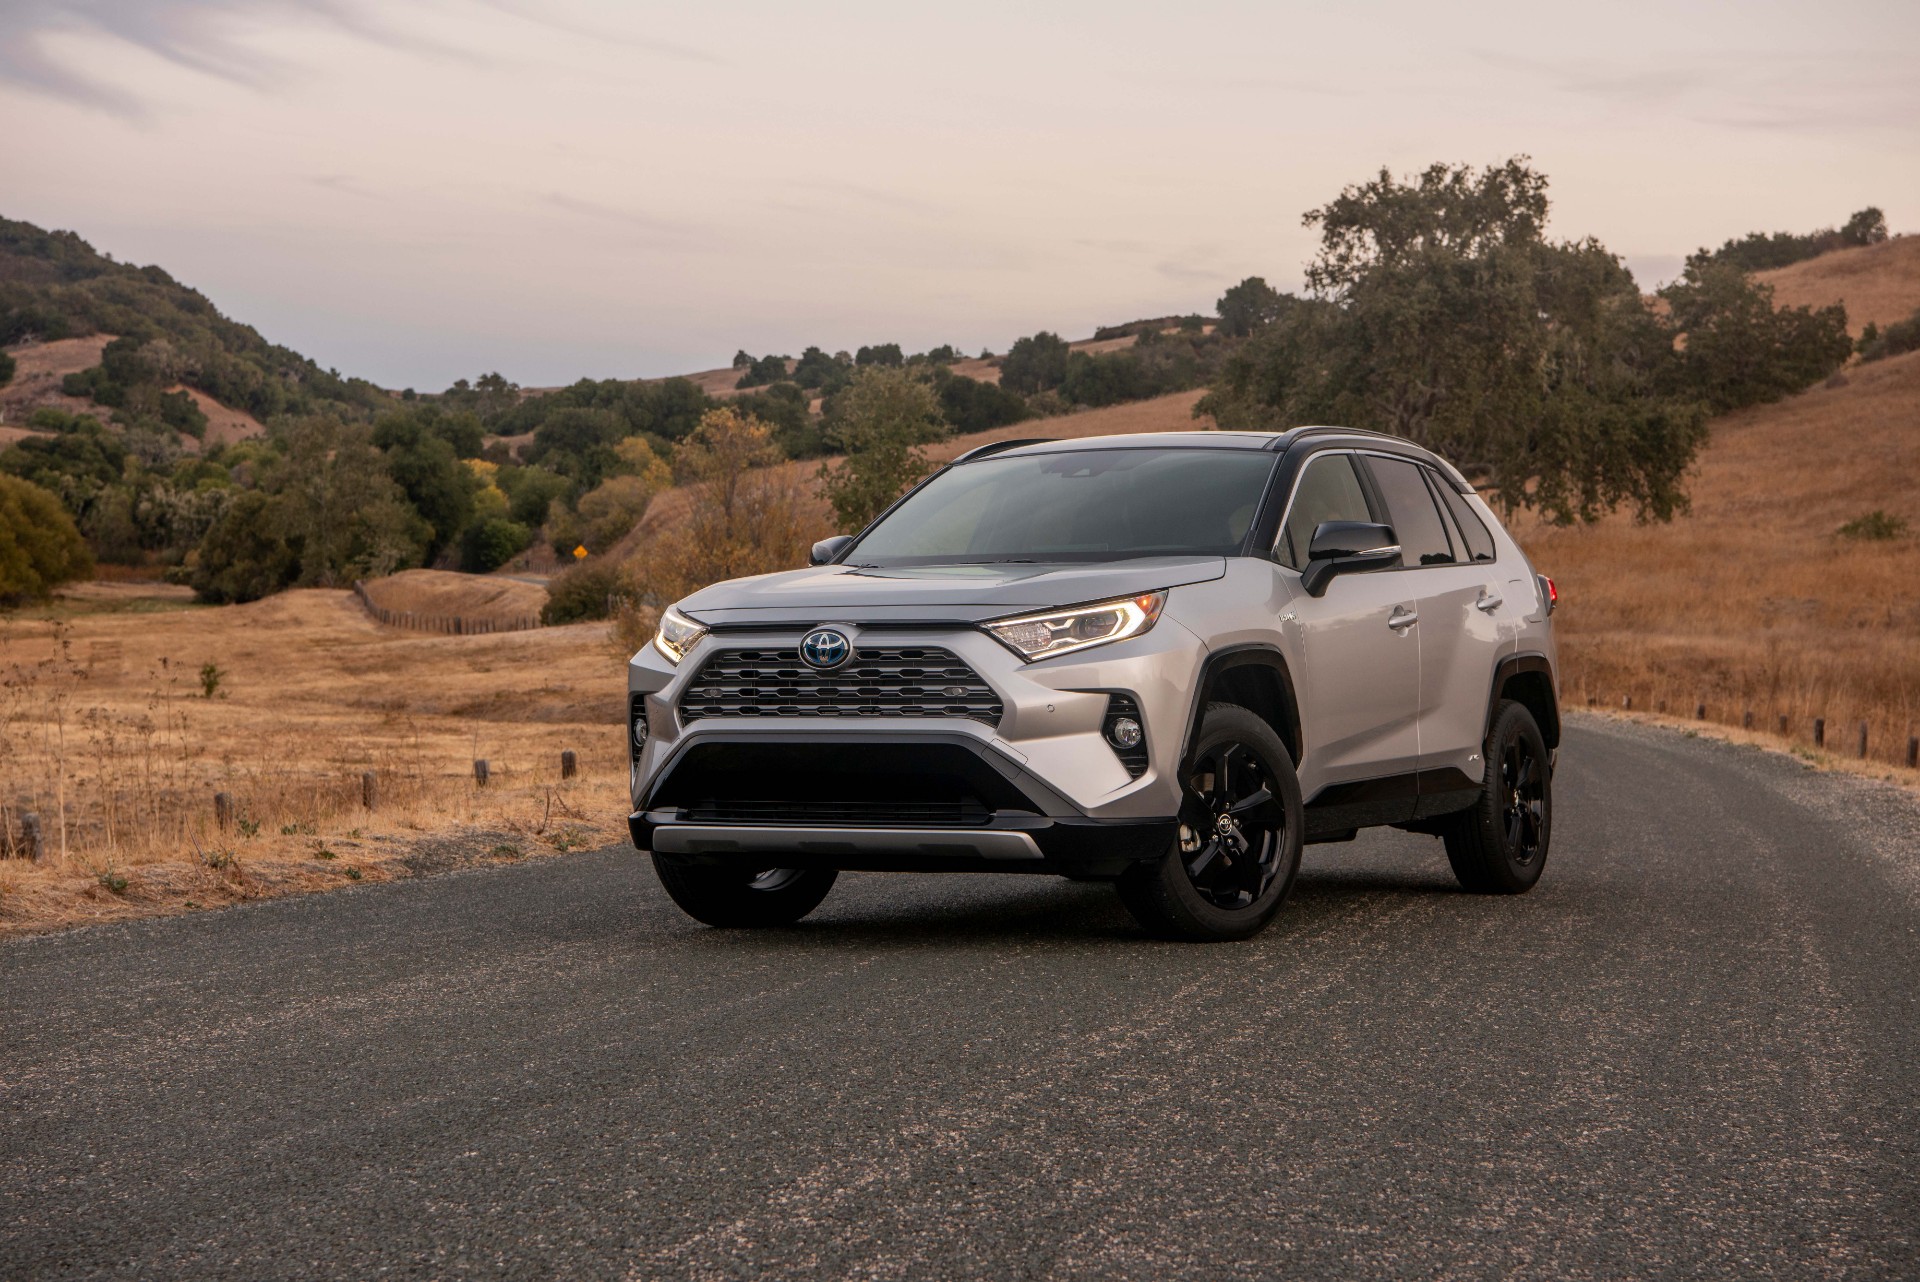 2019 Toyota RAV4 Hybrid: At 39 mpg, the highest-mileage SUV without a